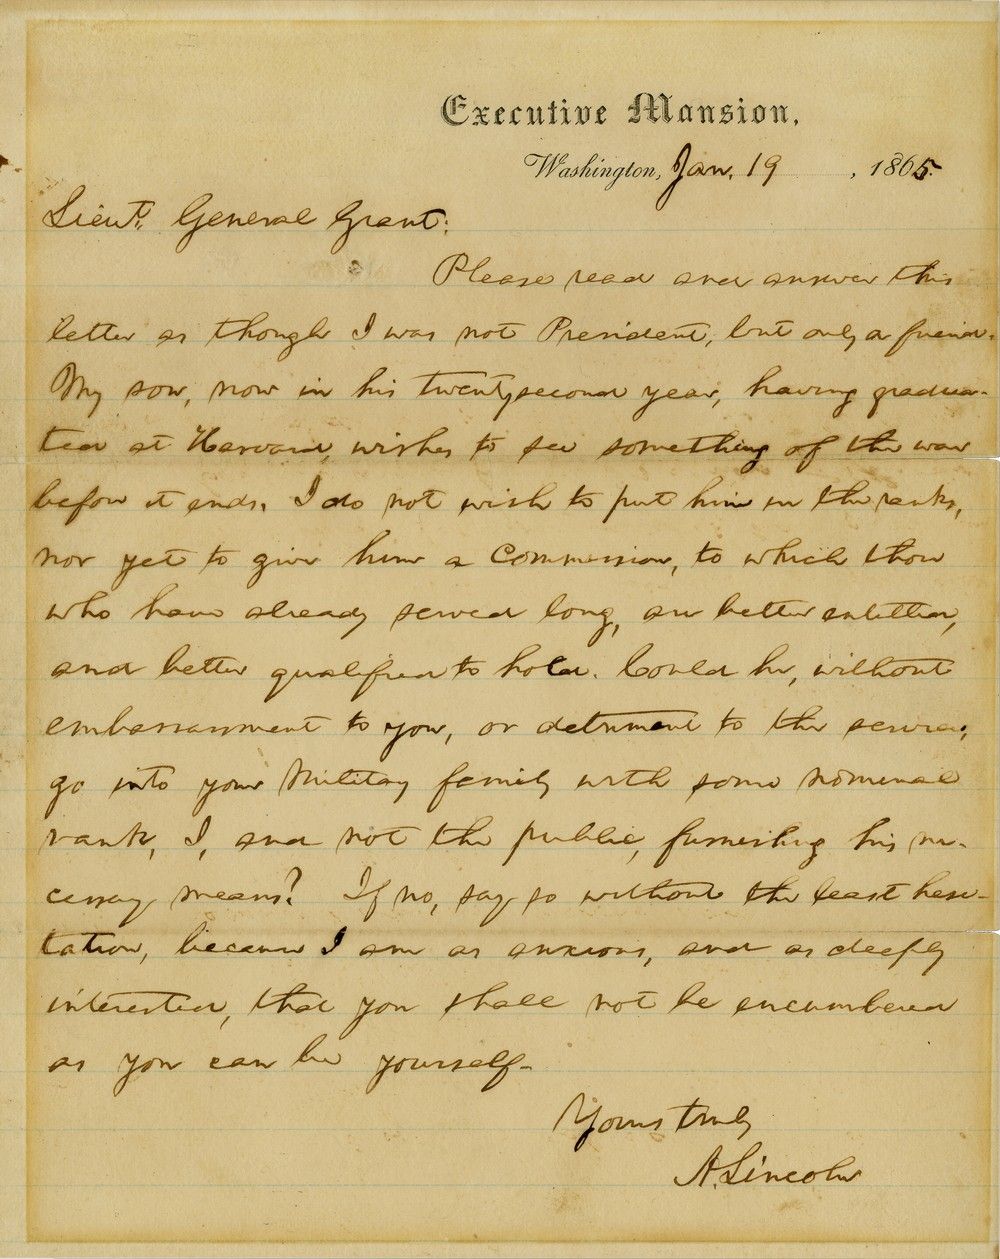 Lincoln Asks General Grant as a Friend, for a Favor: Find a Place for His Son, Robert, on His Staff